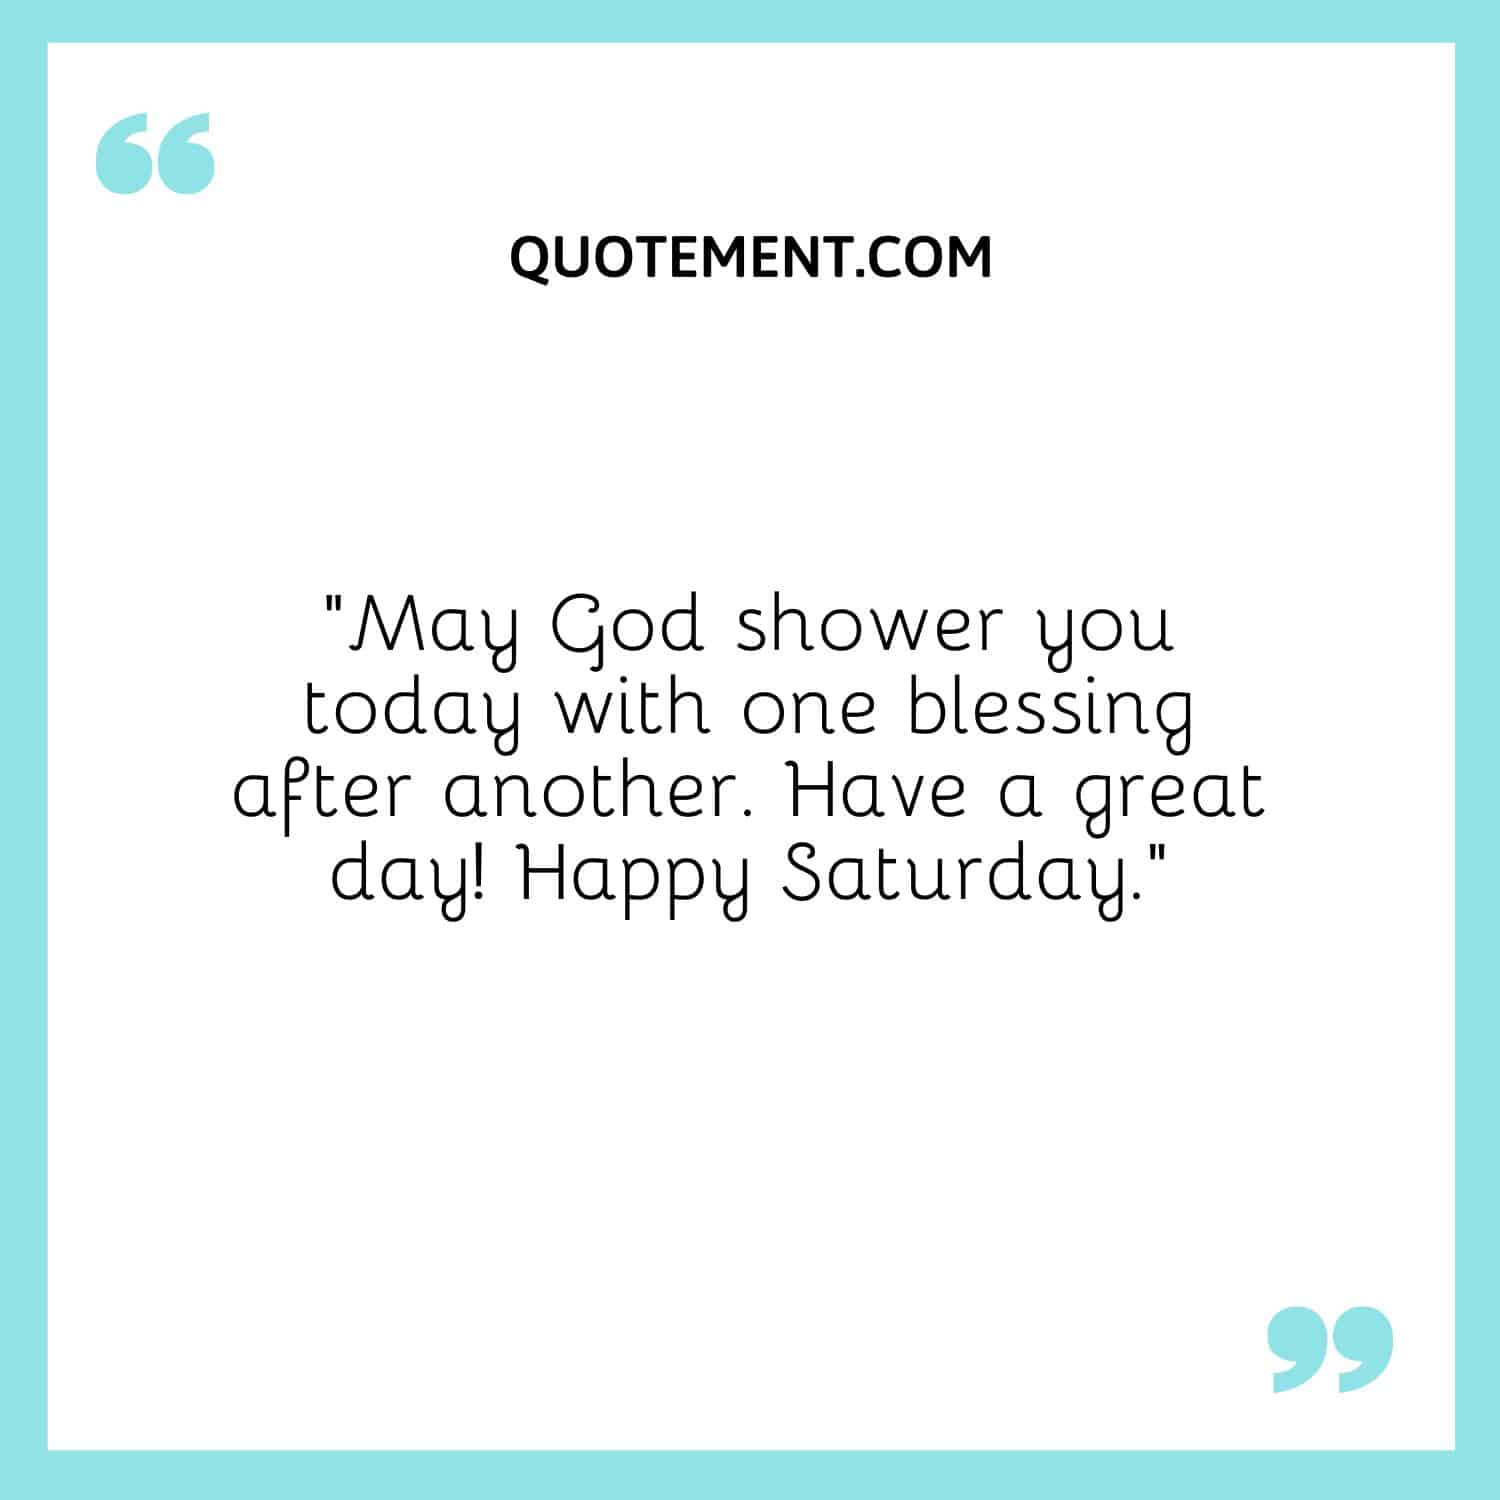 “May God shower you today with one blessing after another. Have a great day! Happy Saturday.”